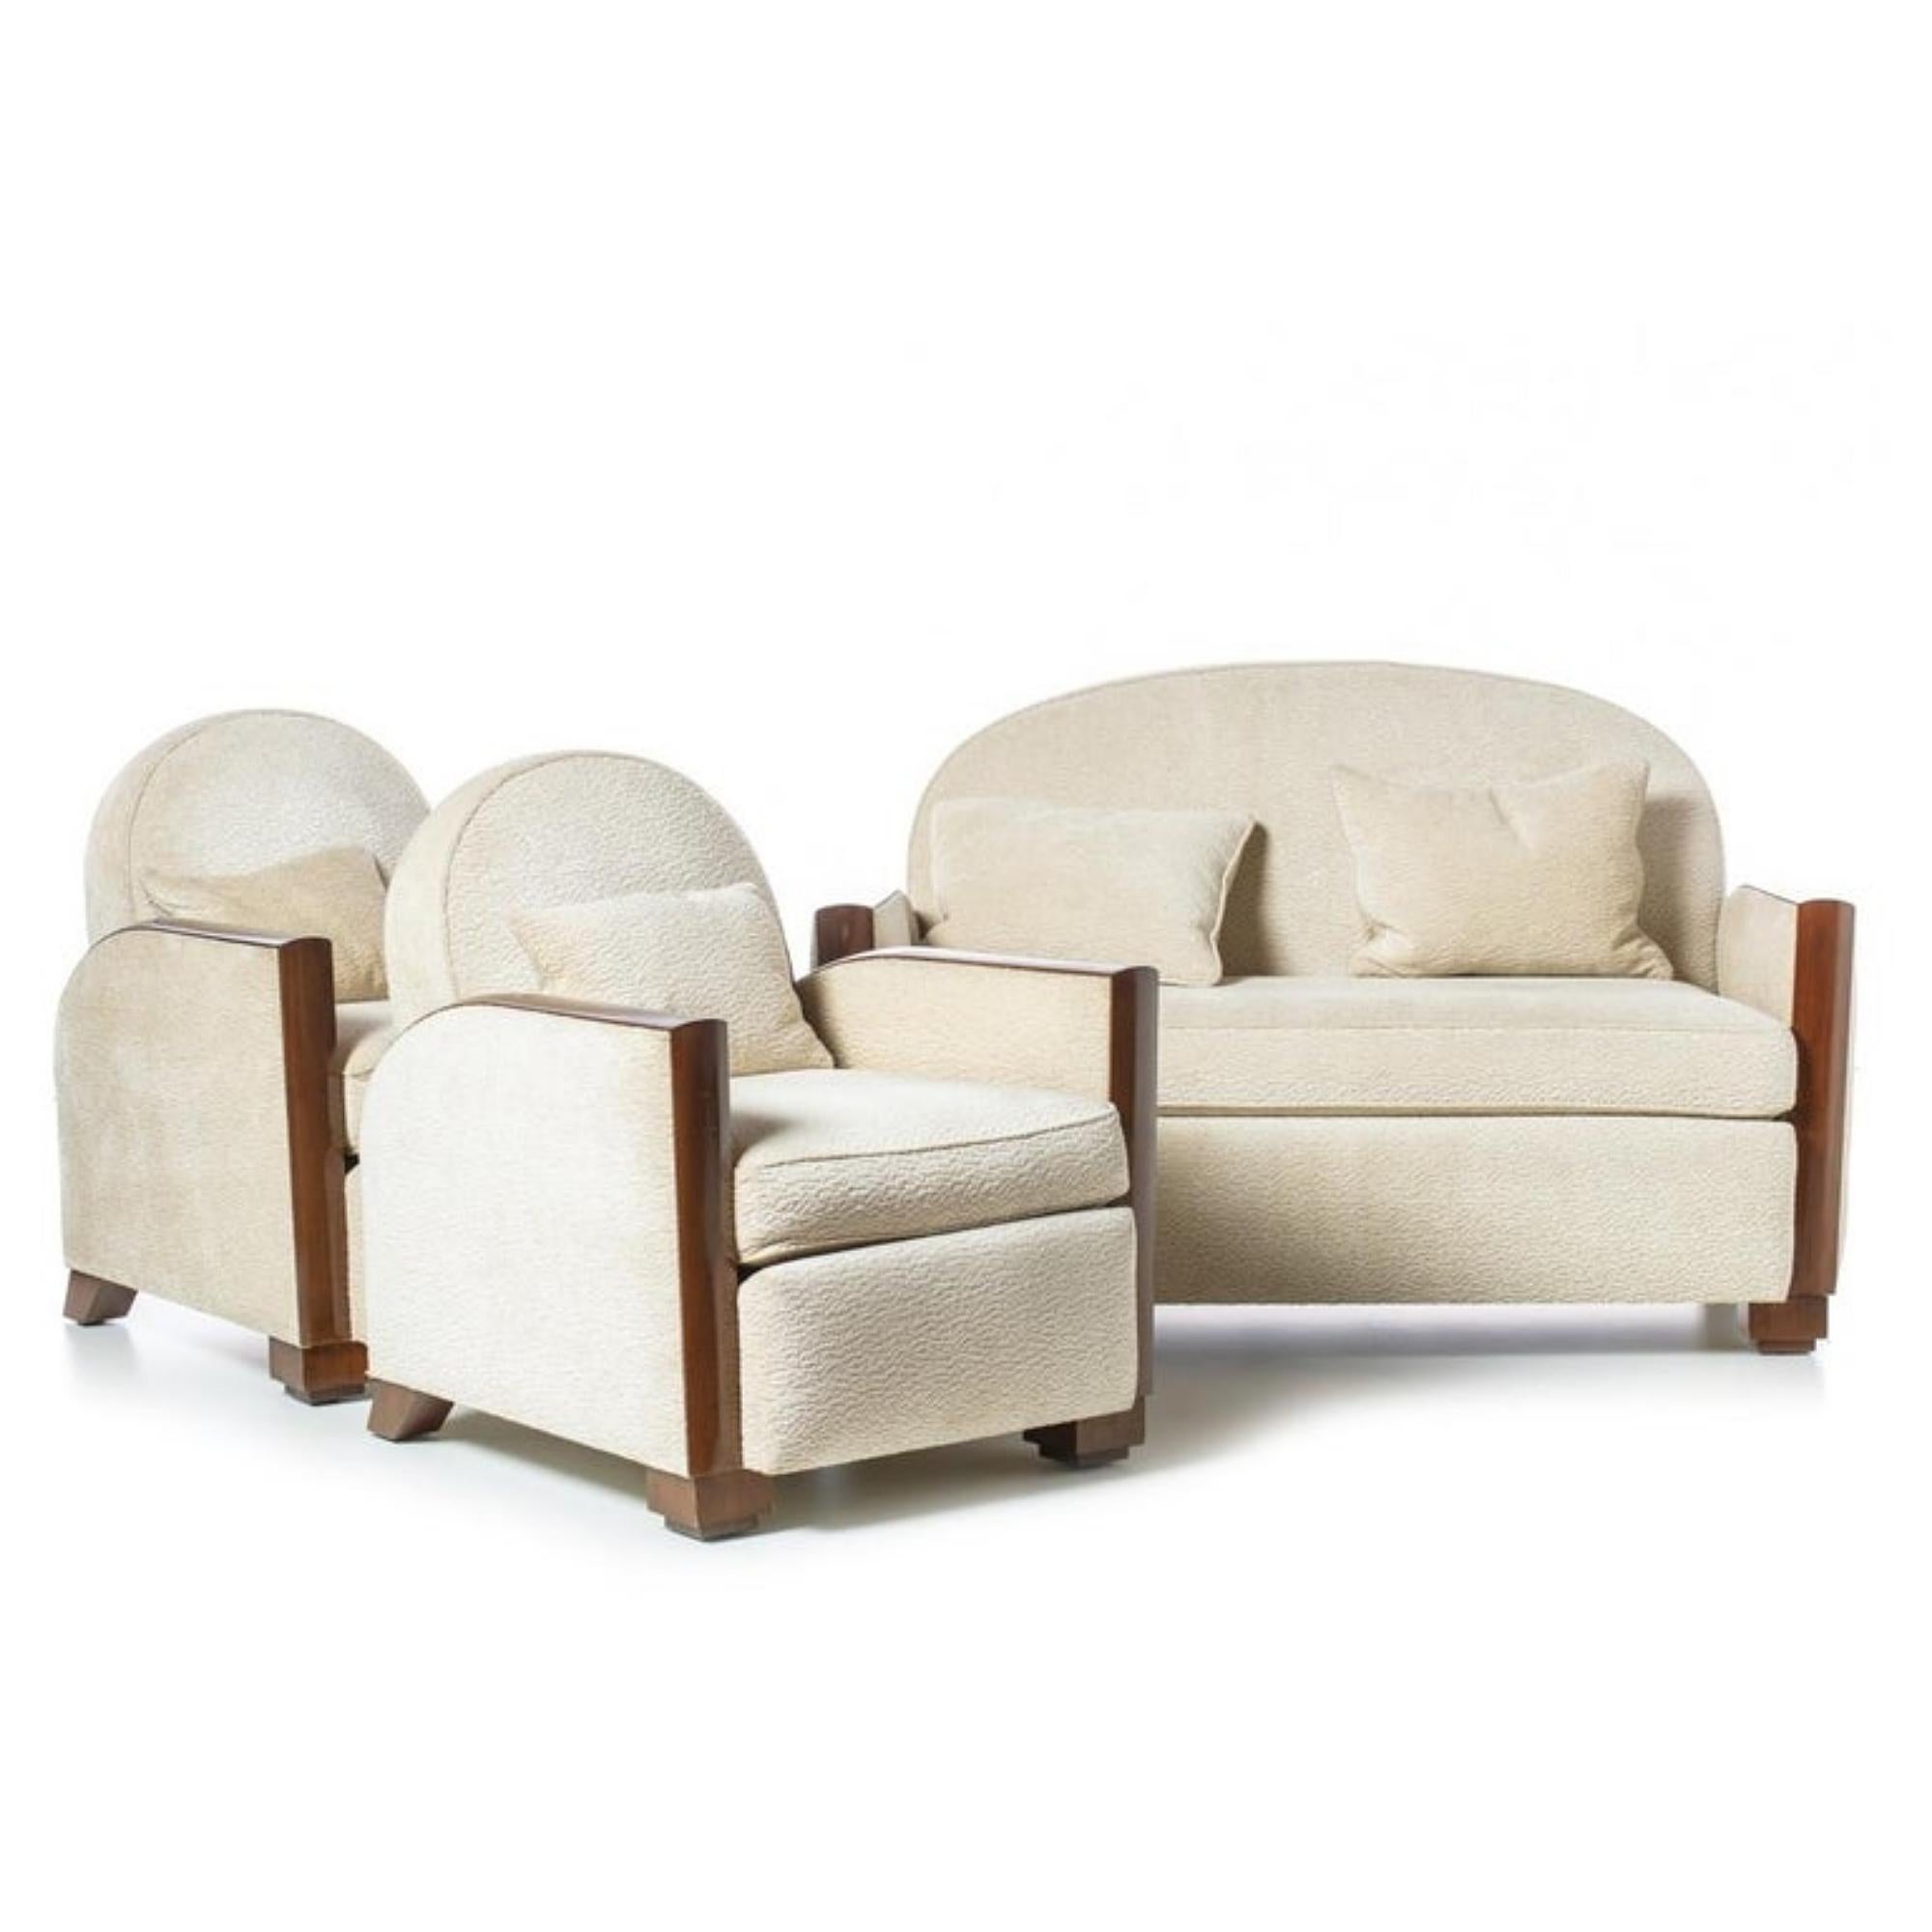 Hand-Crafted Art Deco Sofa Set, French, 20th Century For Sale